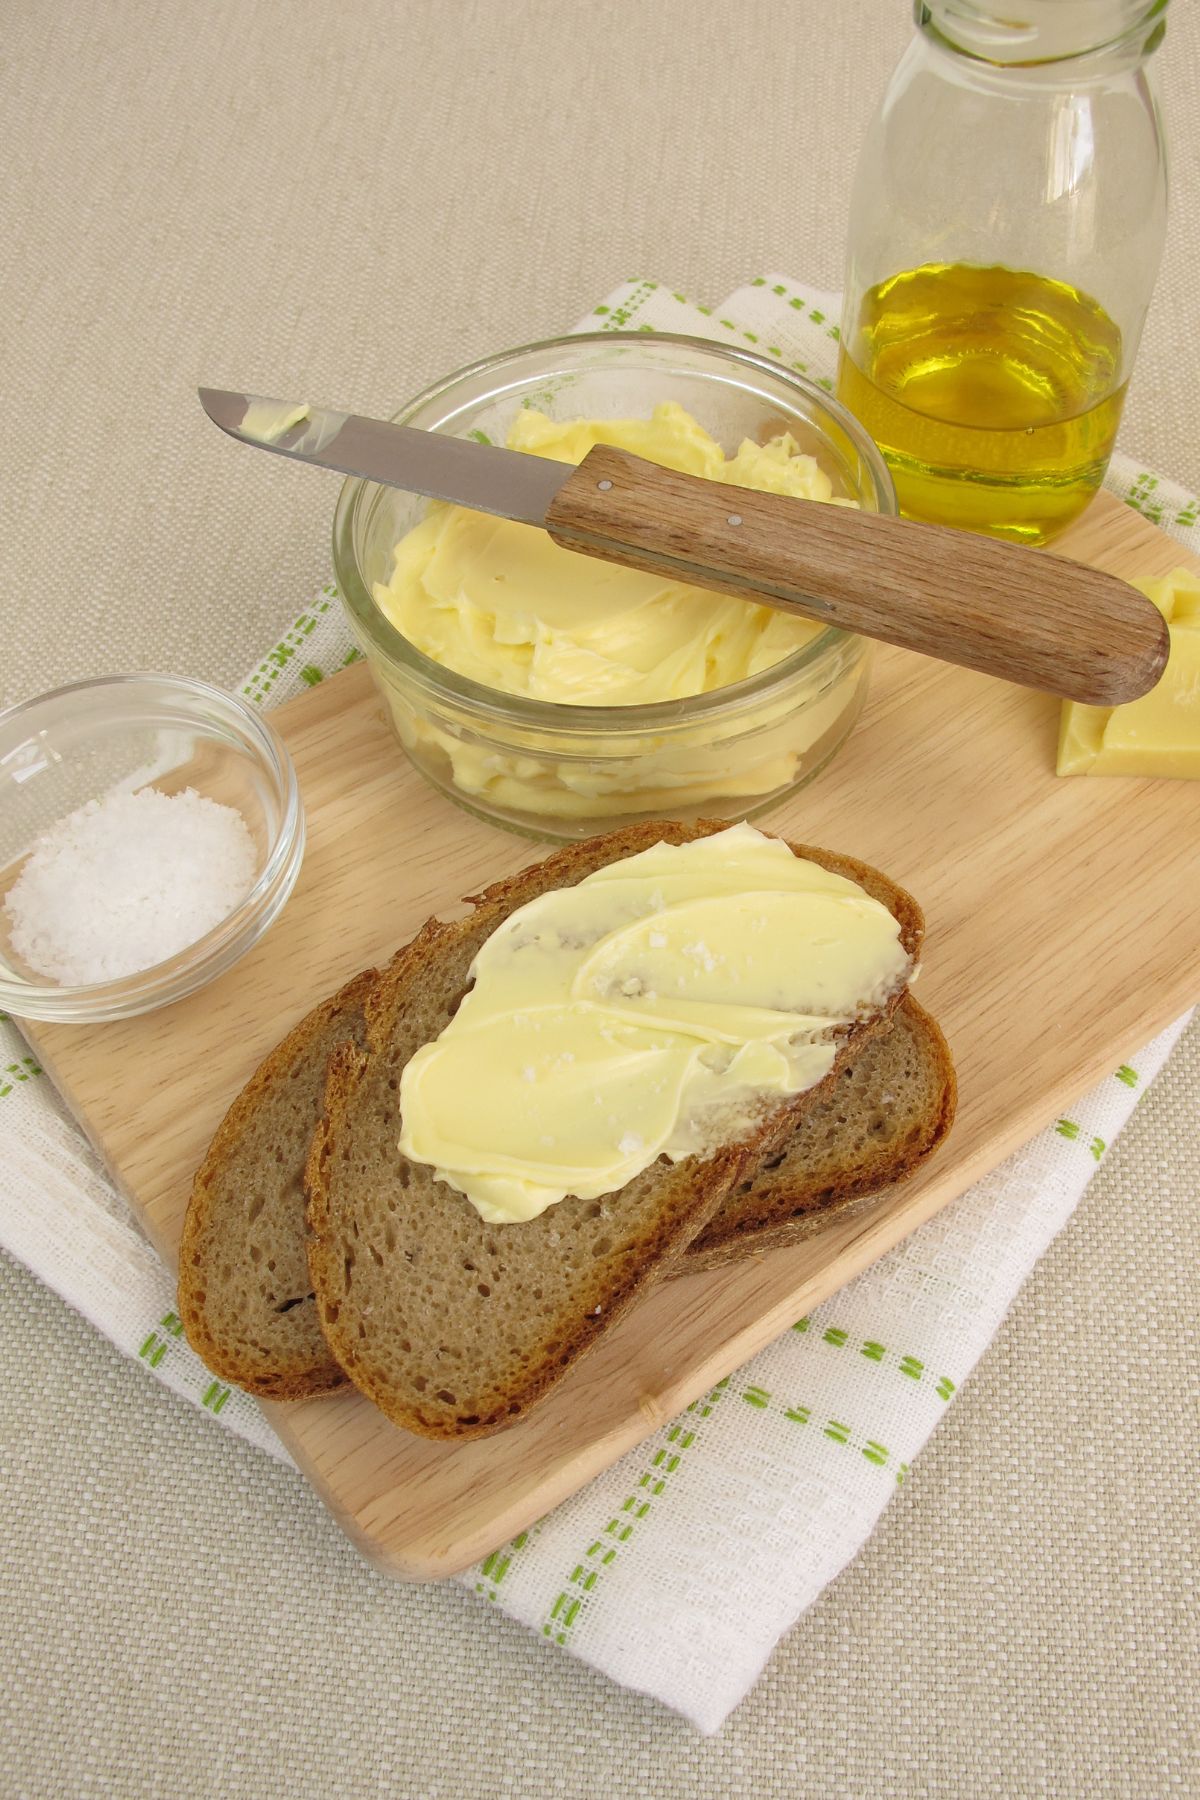 Vegan butter spread with toast on cutting board.